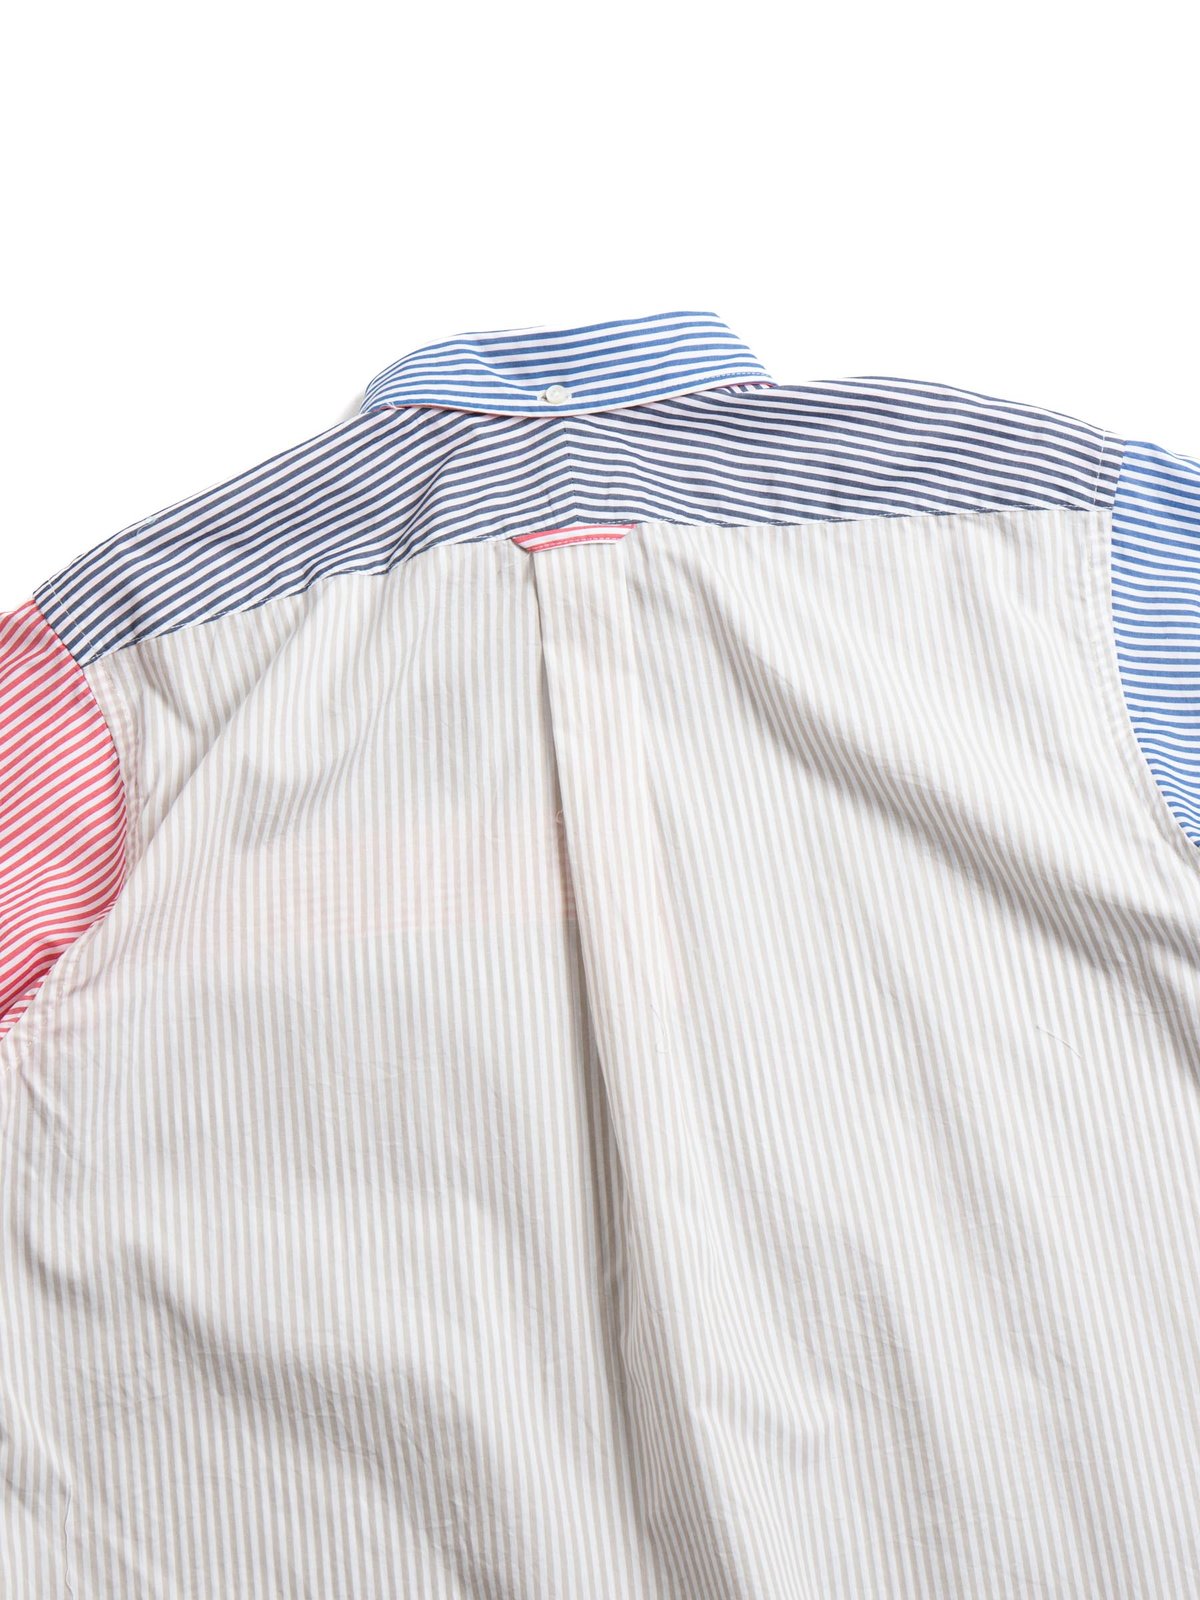 POPOVER DB SHIRT NAVY CANDY STRIPE BROADCLOTH - Image 3